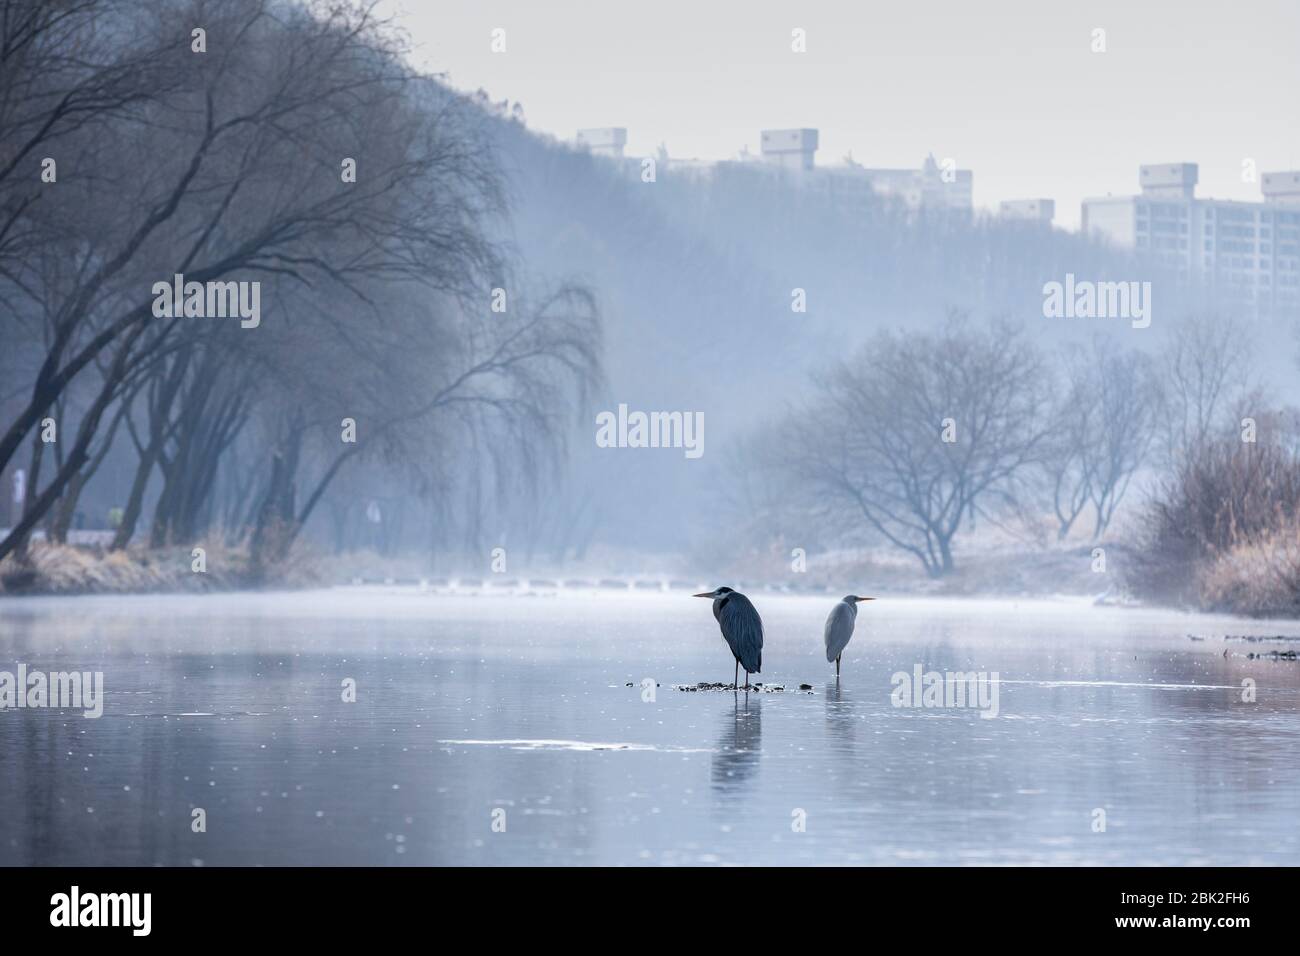 misty morning landscape with a couple of gray heron in the Tancheon river, Seongnam, Korea, 26 Jan 2020 Stock Photo